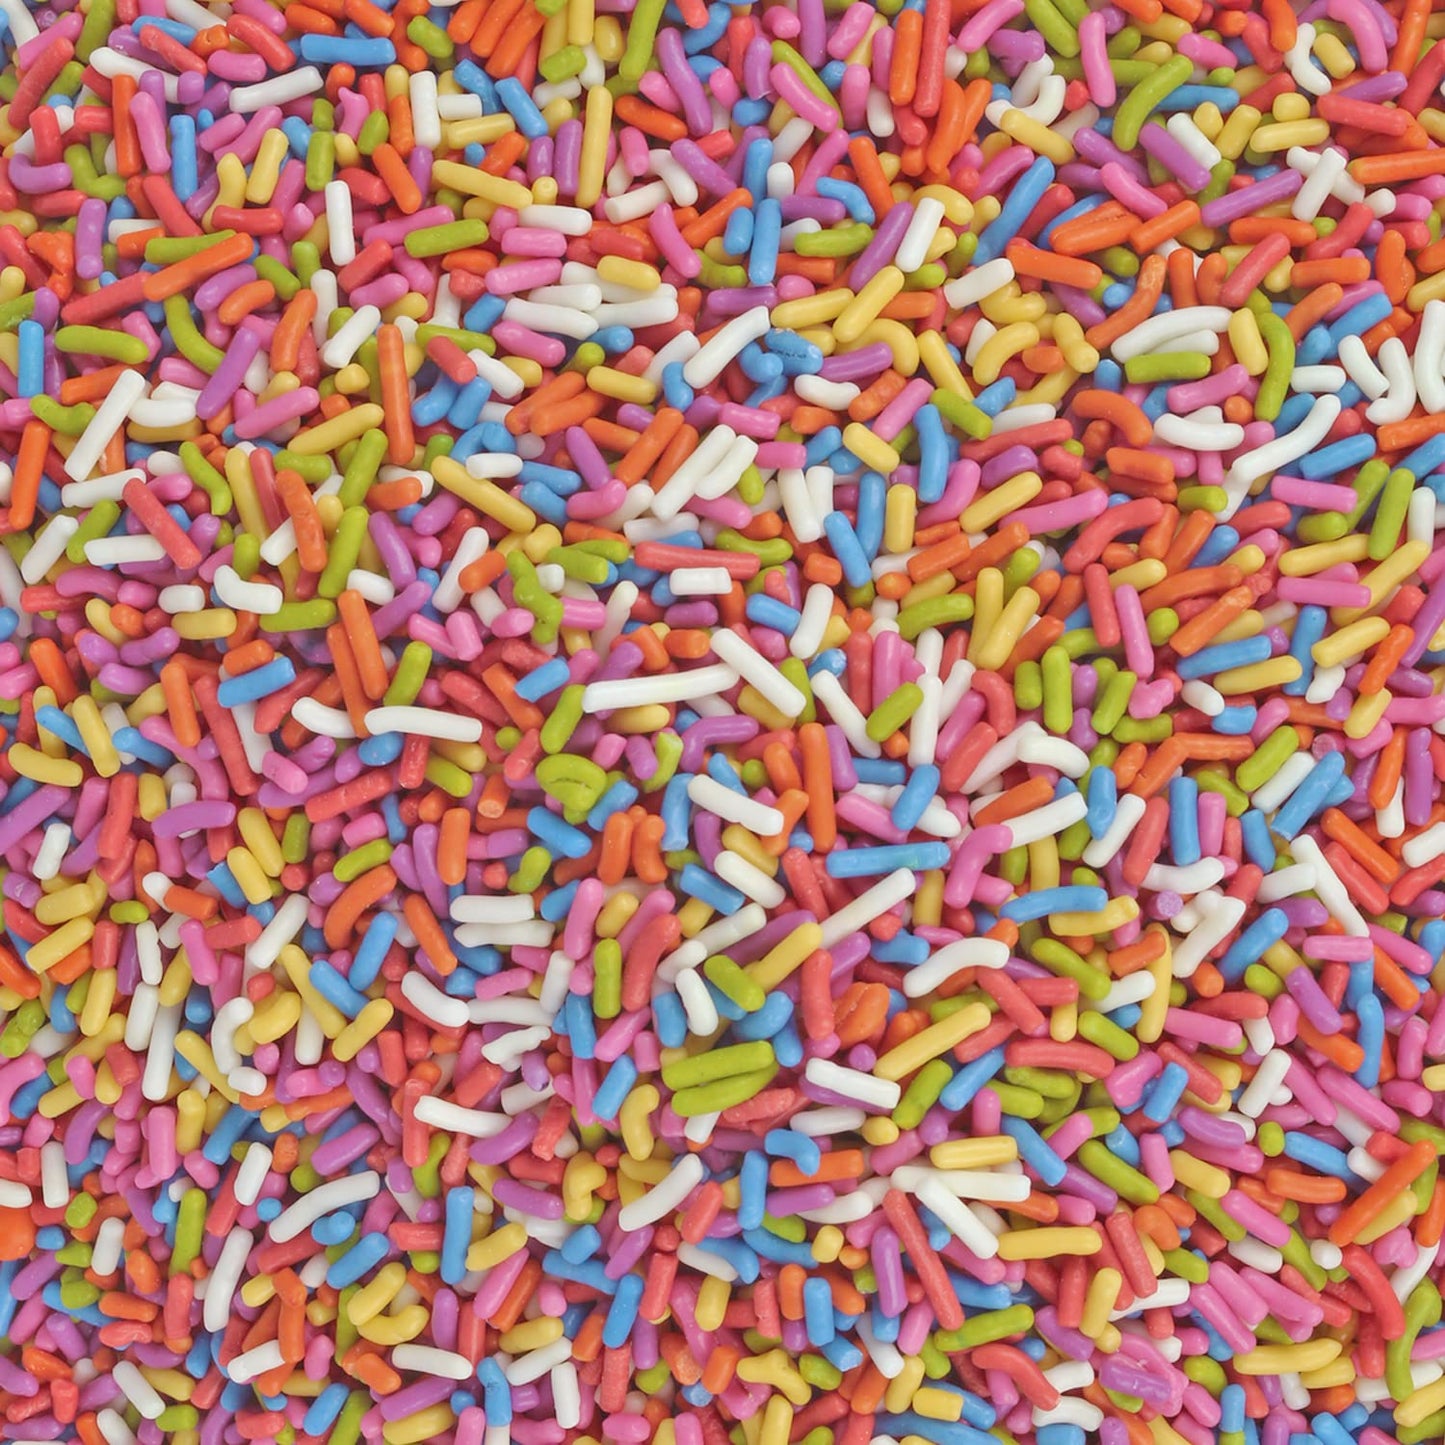 BULK Natural Rainbow Sprinkles - 18 LB Case - NON GMO - No Dyes - Wholesale Bulk Toppings, Great for Bakeries & Ice Cream Shops